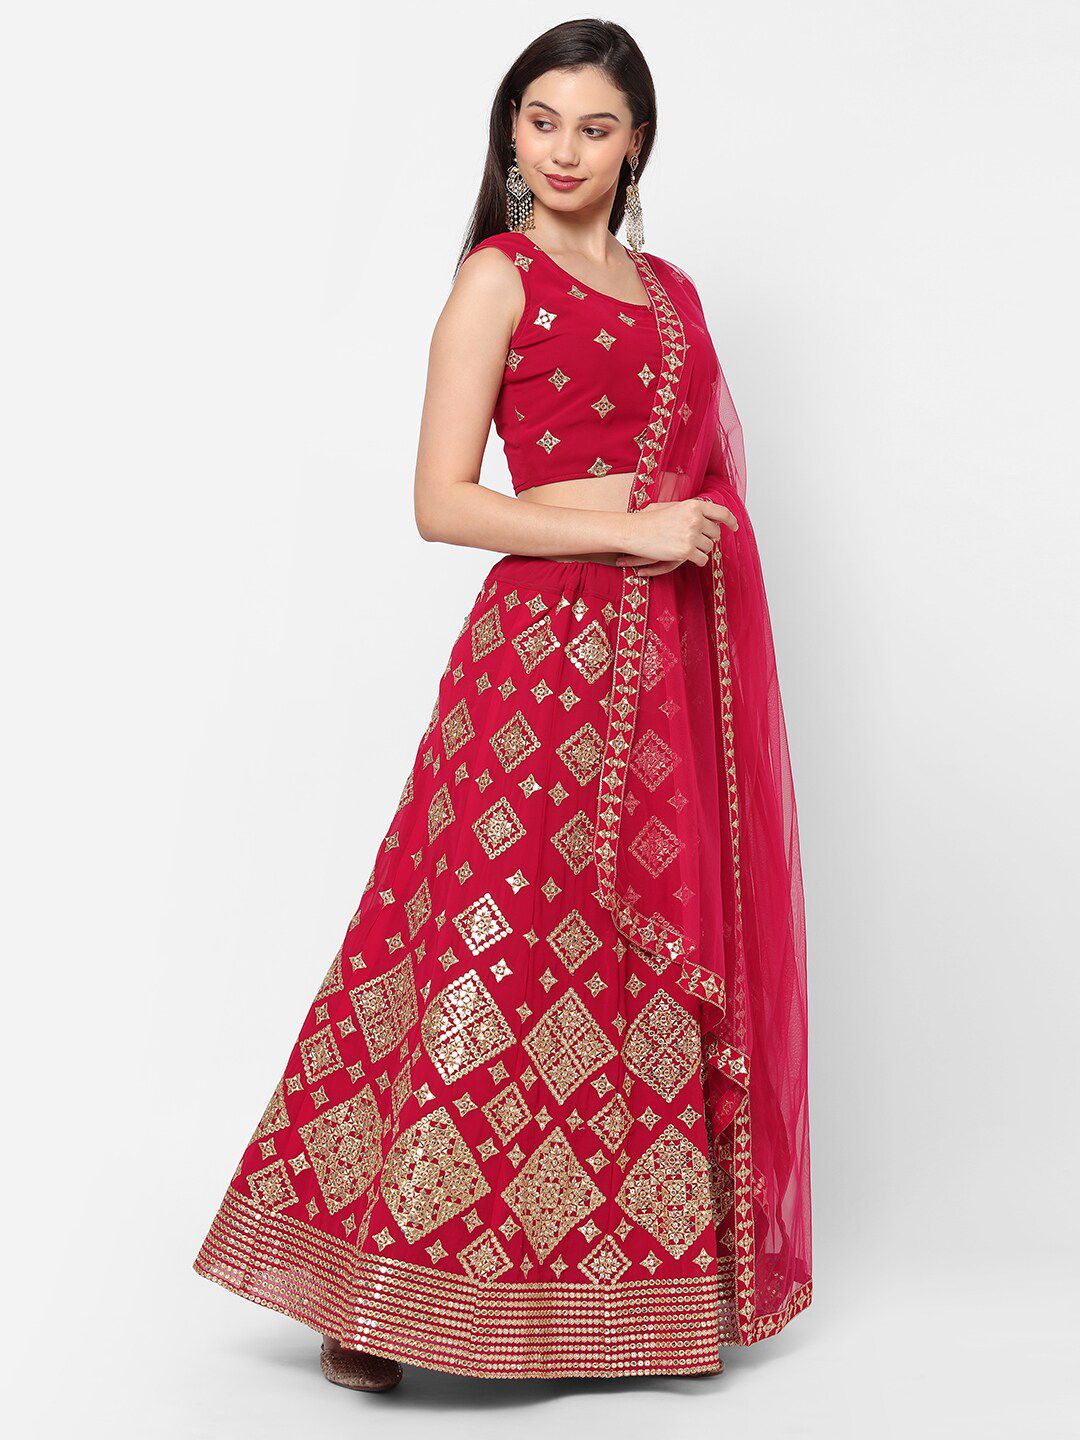 RedRound Magenta & Gold-Toned Embroidered Mirror Work Semi-Stitched Lehenga & Unstitched Blouse With Dupatta Price in India